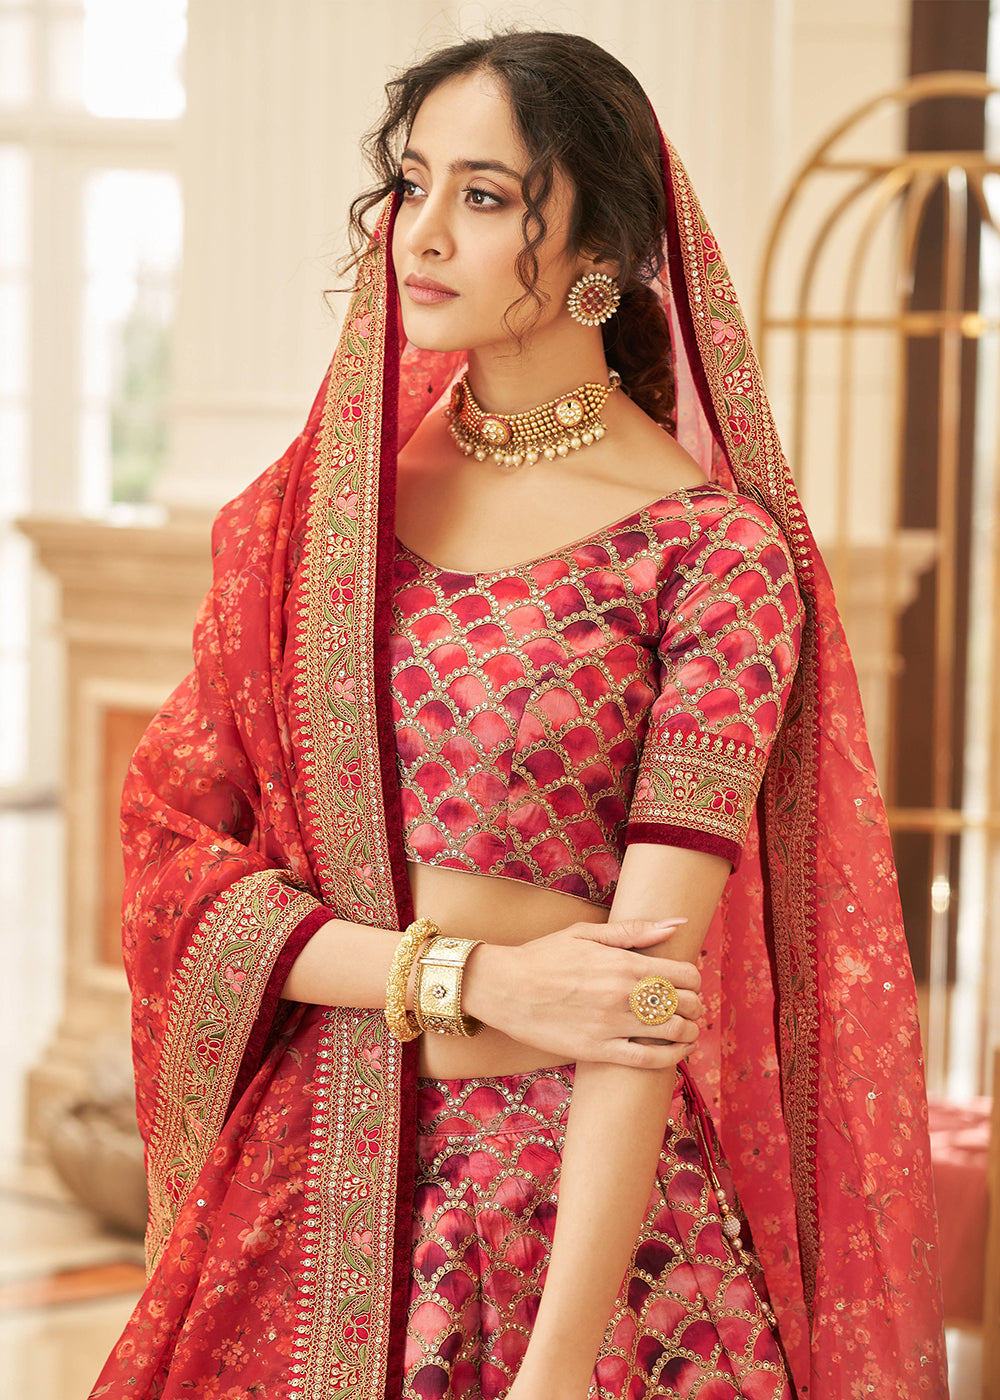 Buy Now Appealing Red Art Silk Embroidery Wedding Lehenga Choli Online in USA, UK, Canada & Worldwide at Empress Clothing.